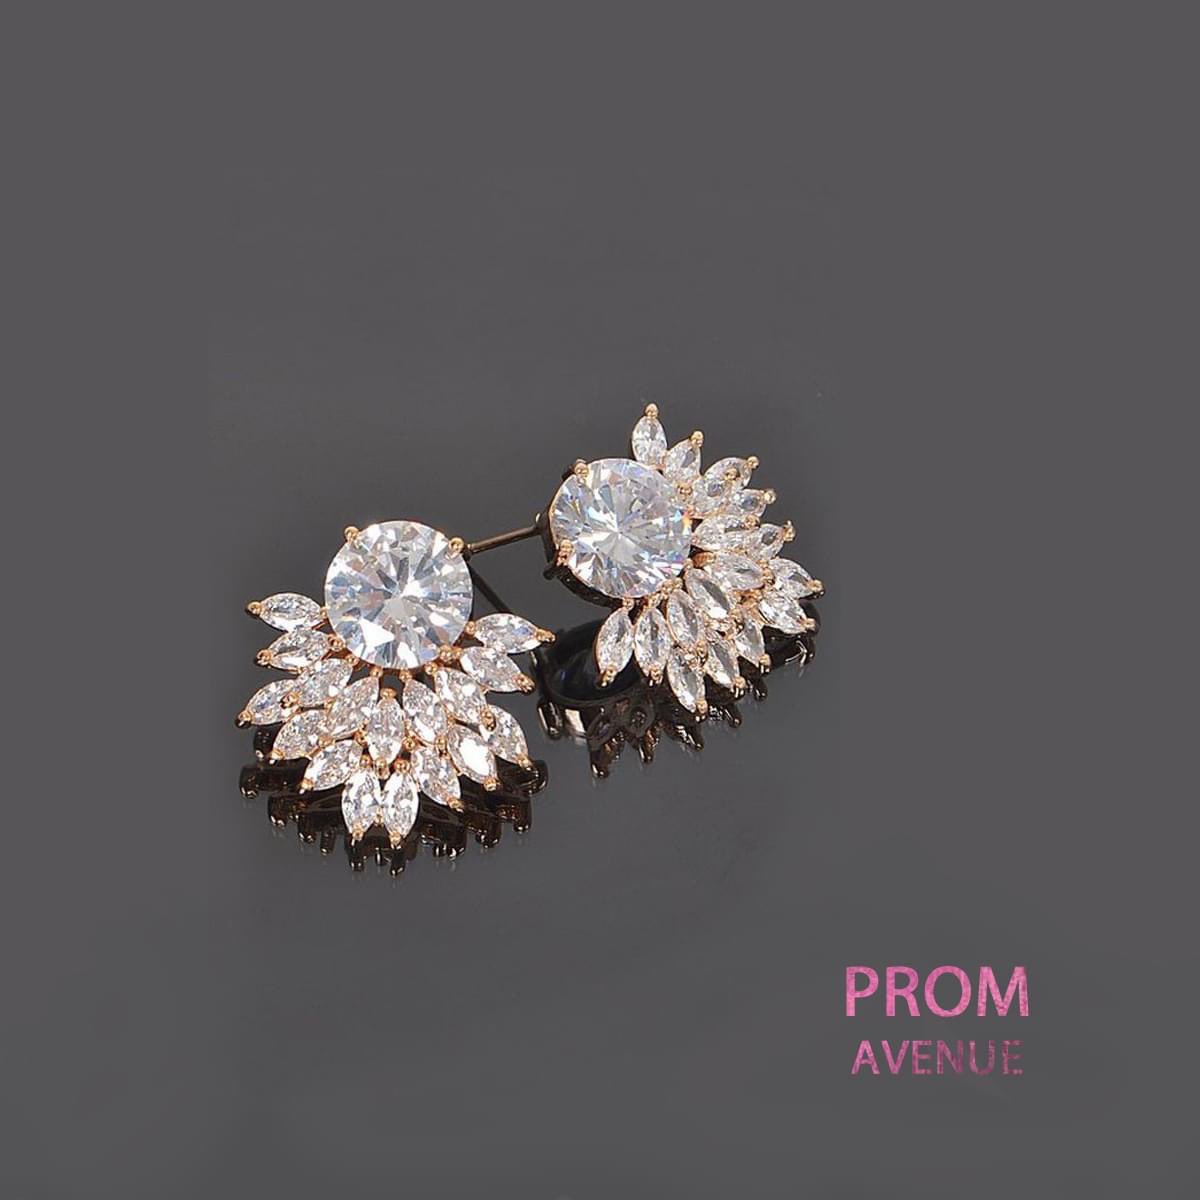 Elevated cubic zirconia setting with extra brilliance and sparkle at prom-Prom-Avenue 💕

prom-avenue.com

#prom #promavenue #promshop #promdress #formals #earringstyle #earrings